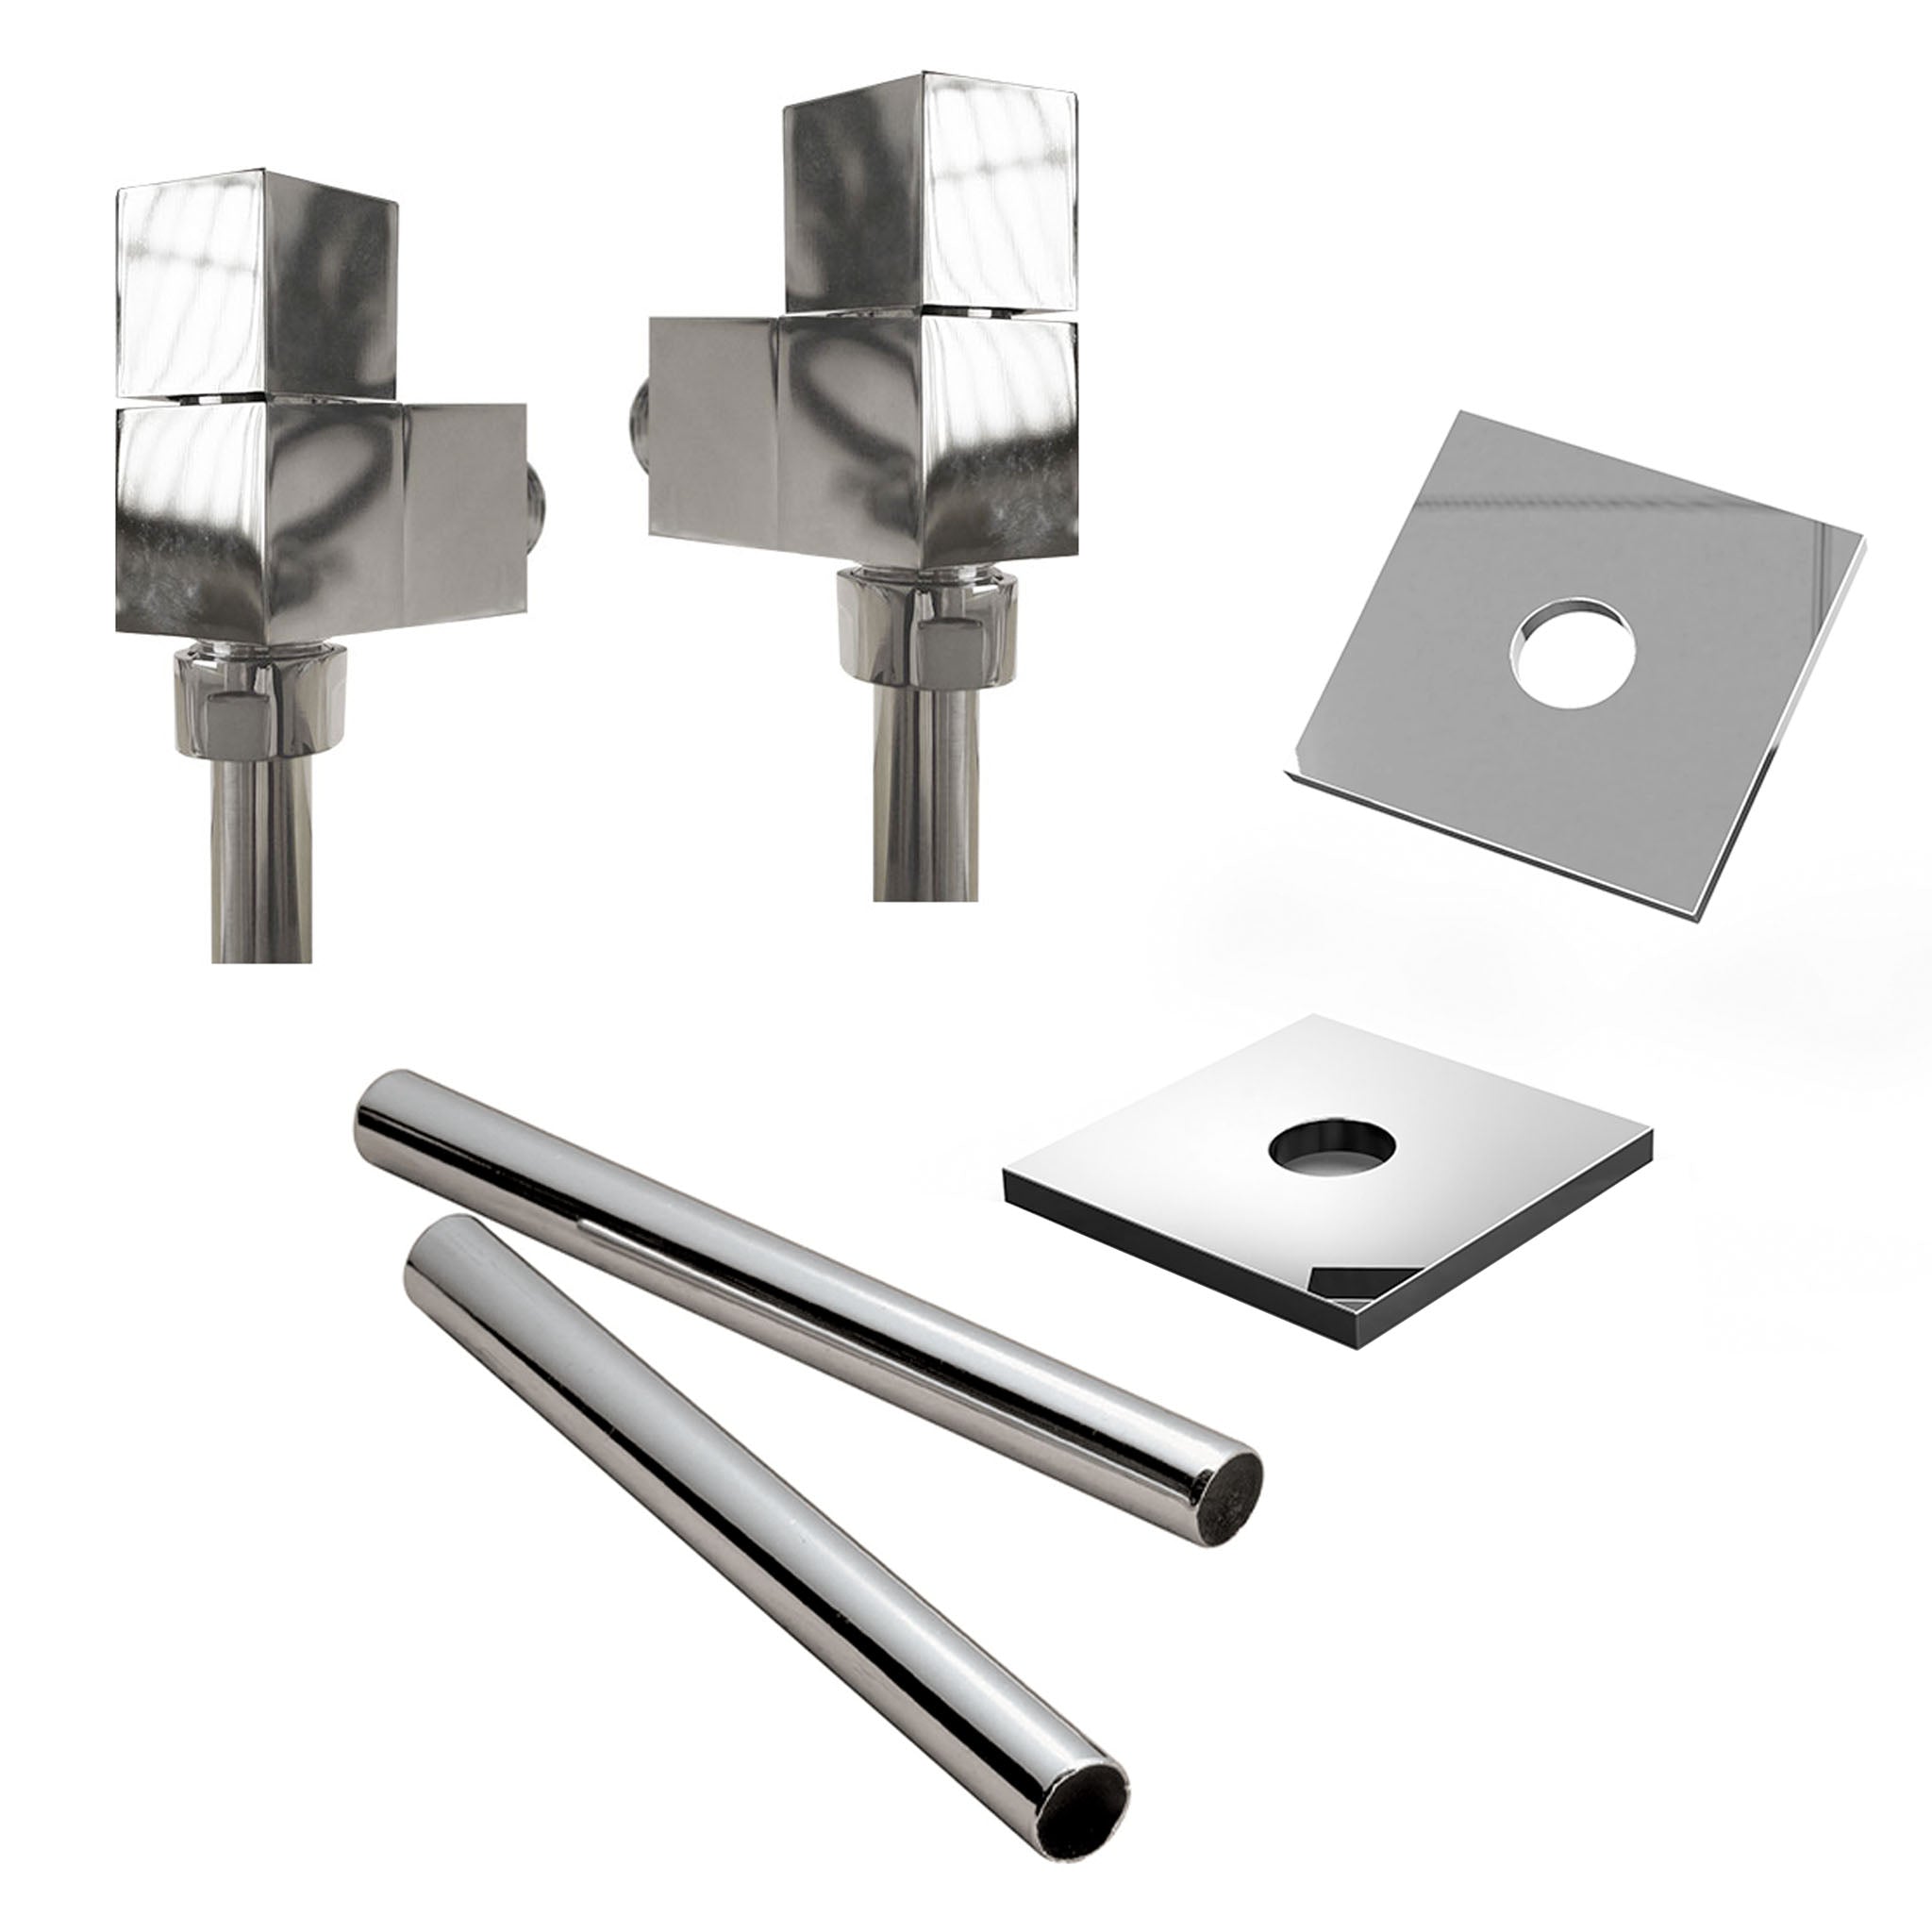 Vogue Piazza Angled Valves With Cover Plate Fixing Kit